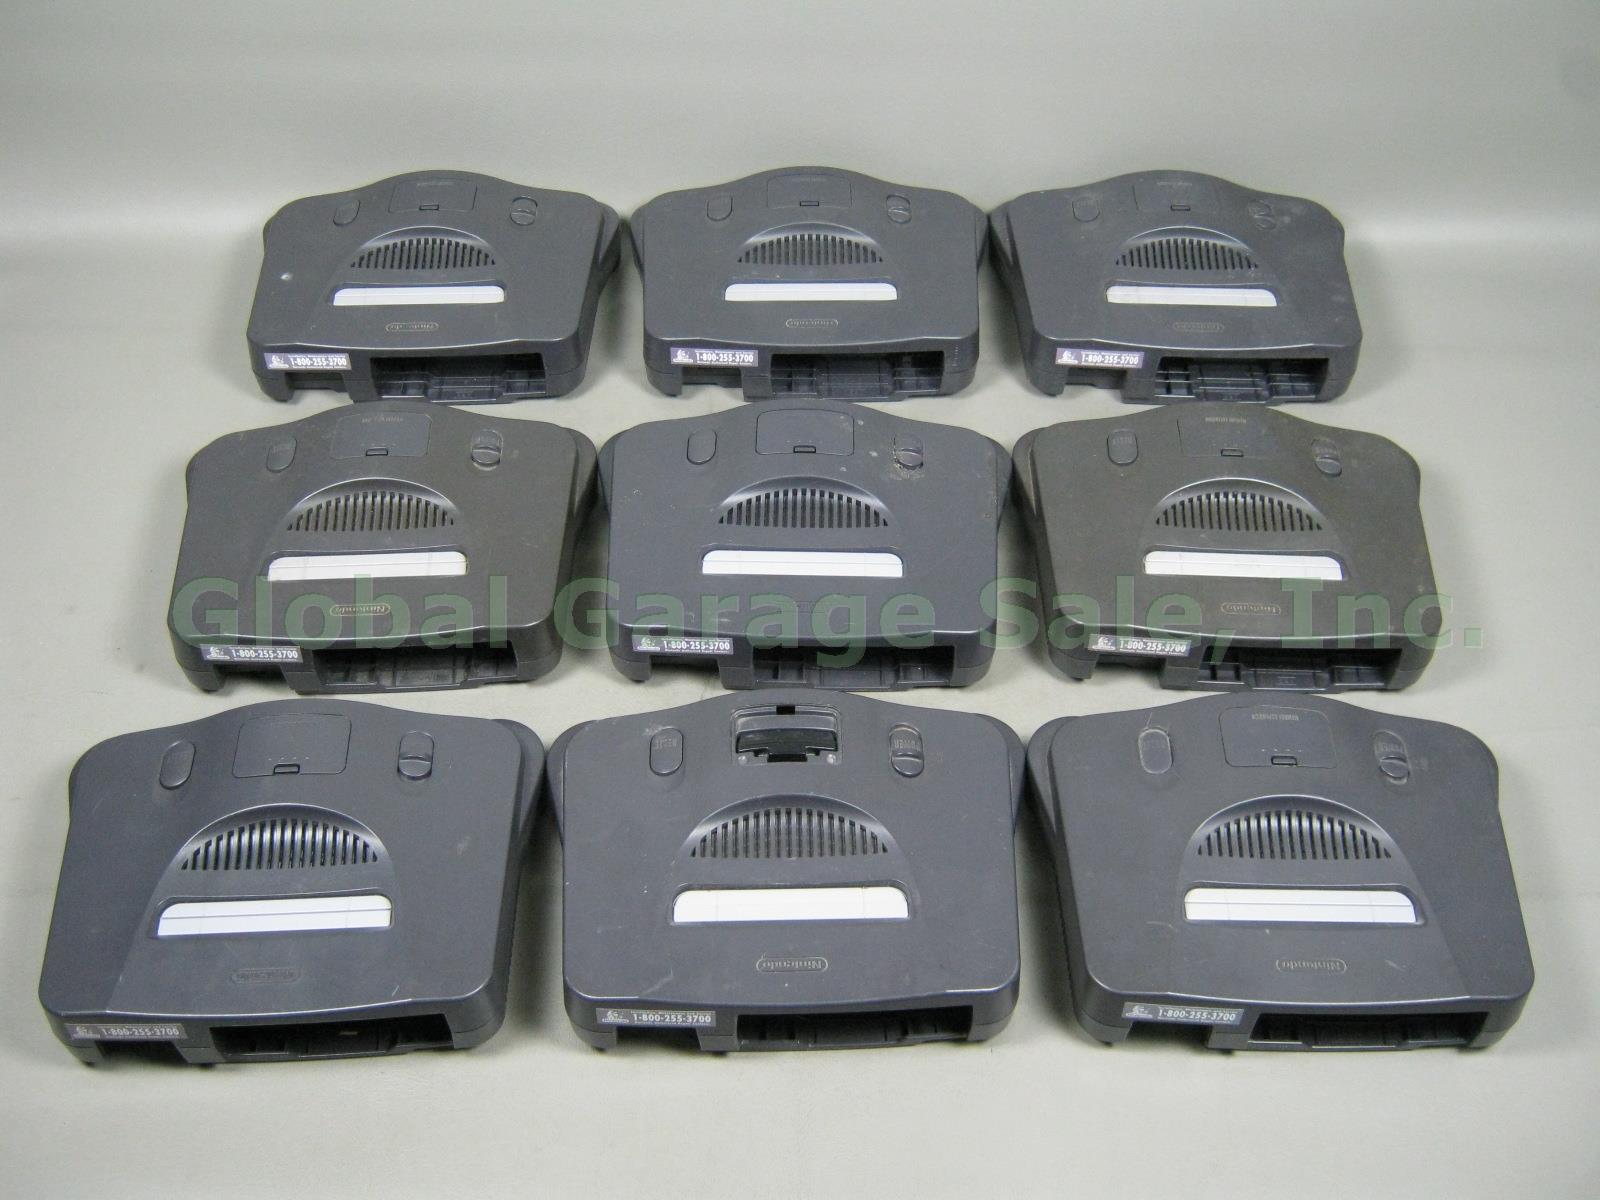 HUGE LOT 9 Nintendo 64 Console Systems 26 Controllers Rumble Pak Memory Card +++ 5